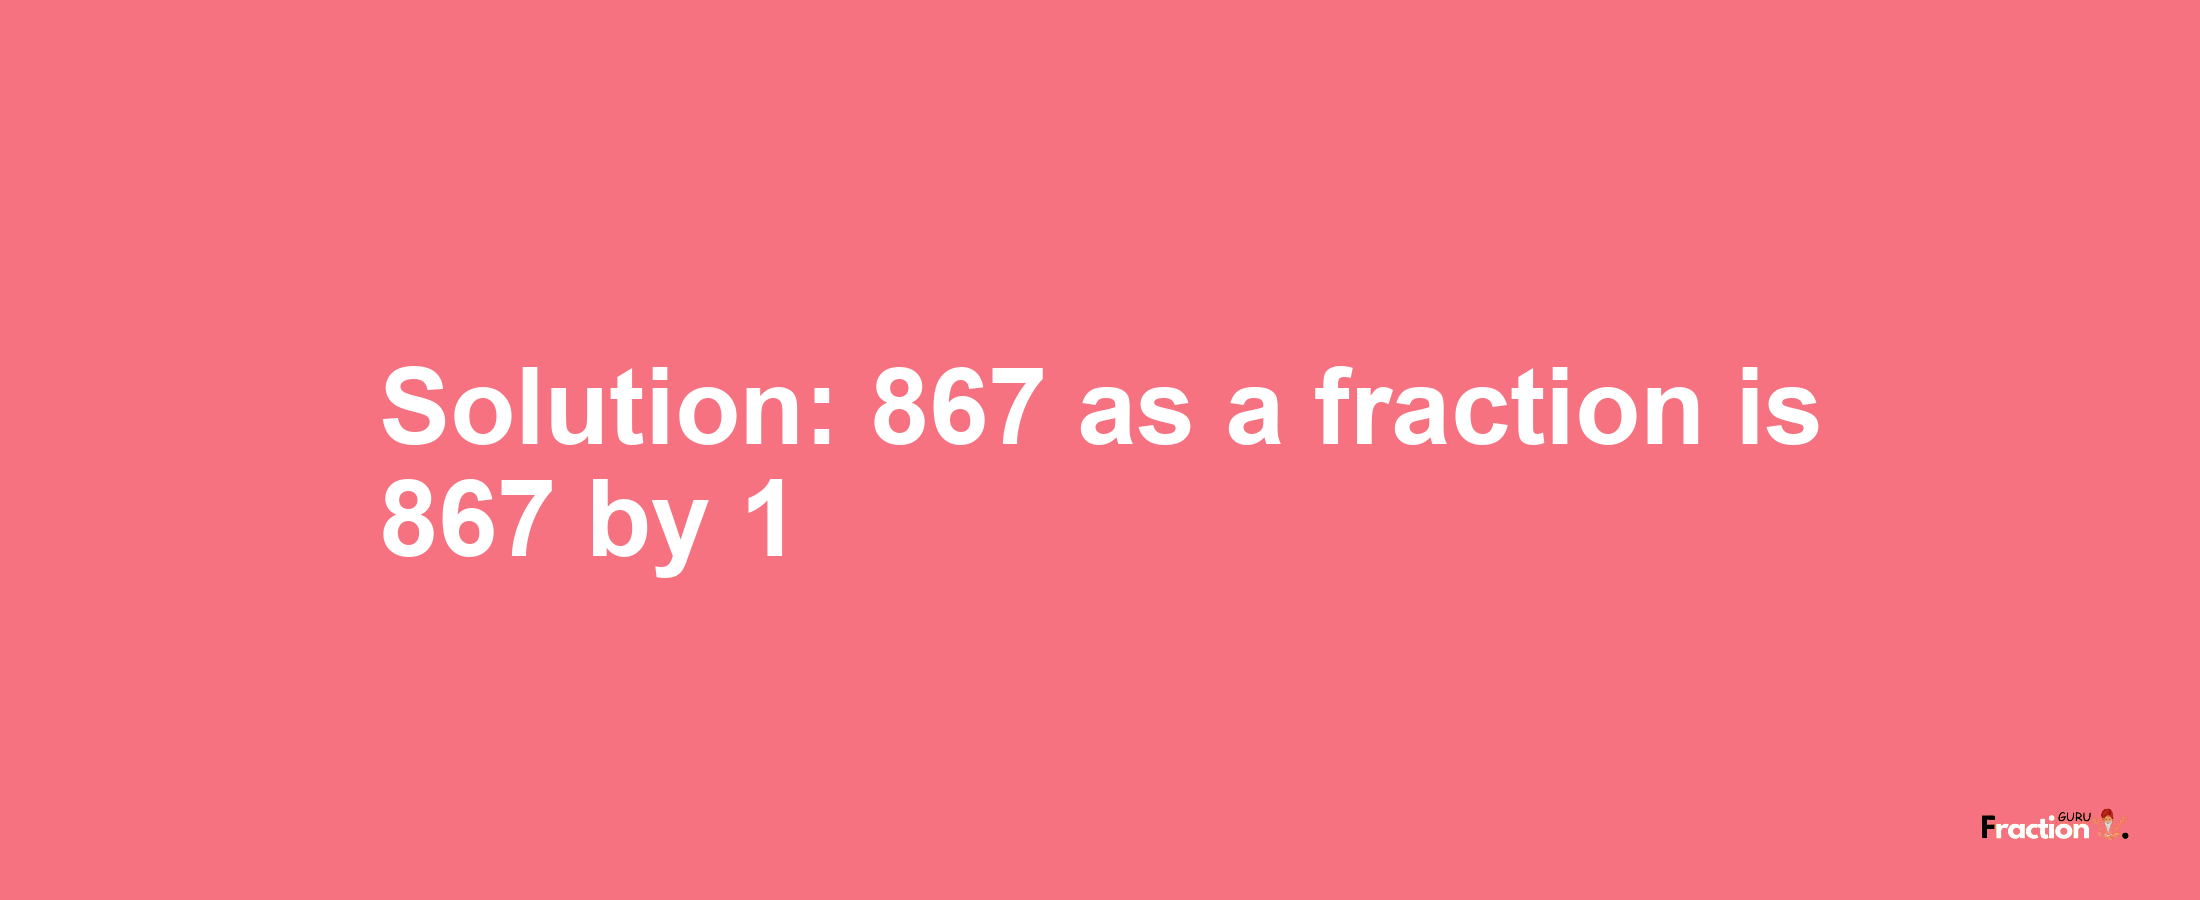 Solution:867 as a fraction is 867/1